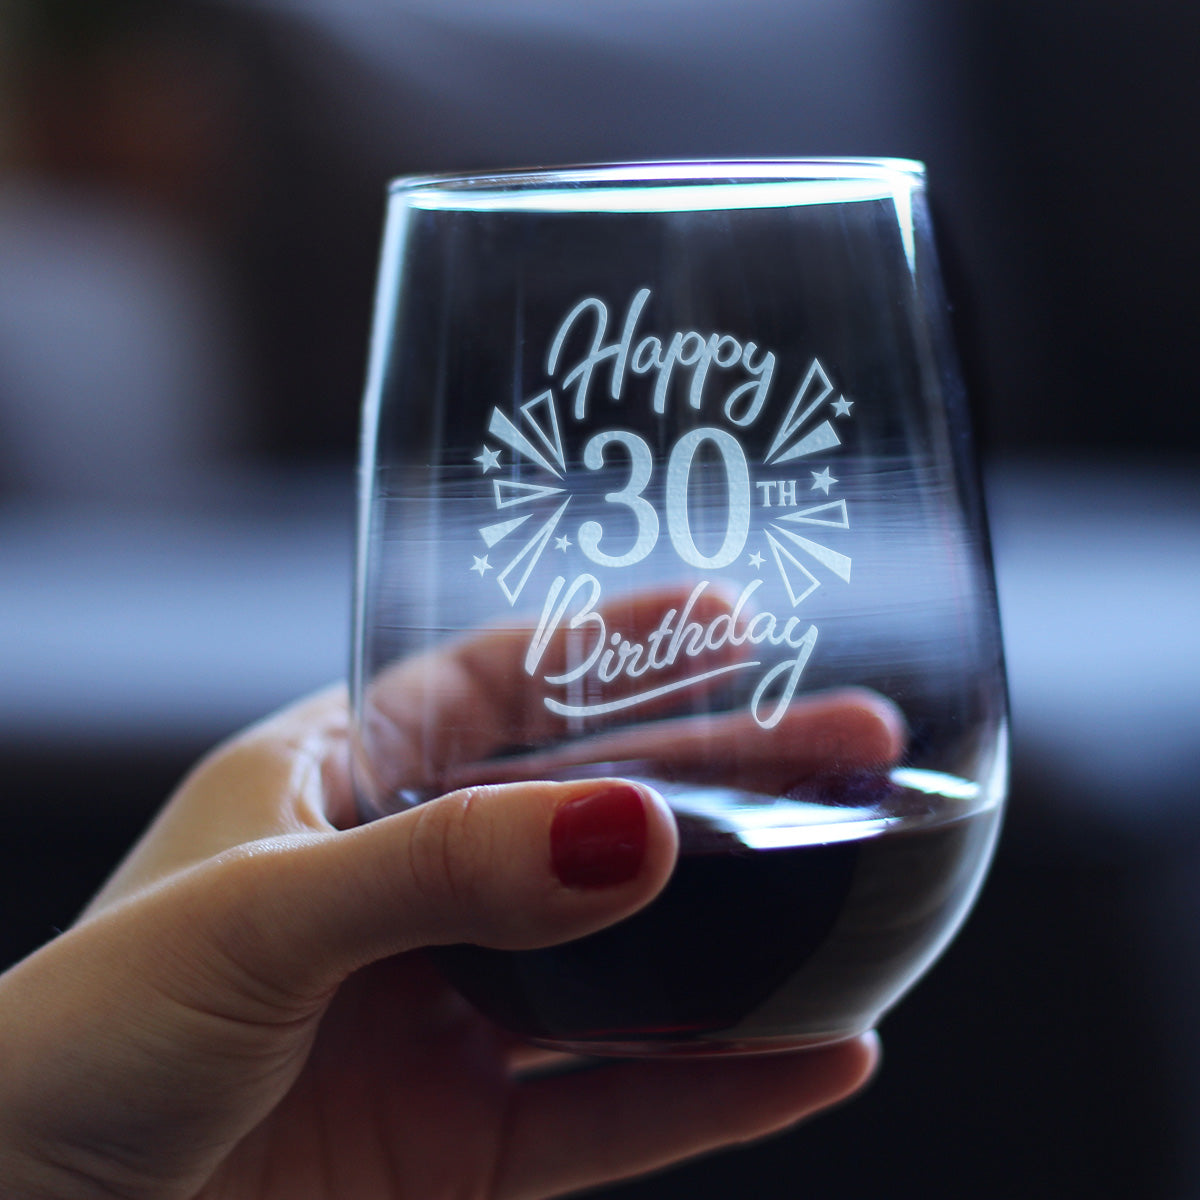 Happy 30th Birthday - Stemless Wine Glass Gifts for Women &amp; Men Turning 30 - Bday Party Decor - Large Glasses 17 Oz